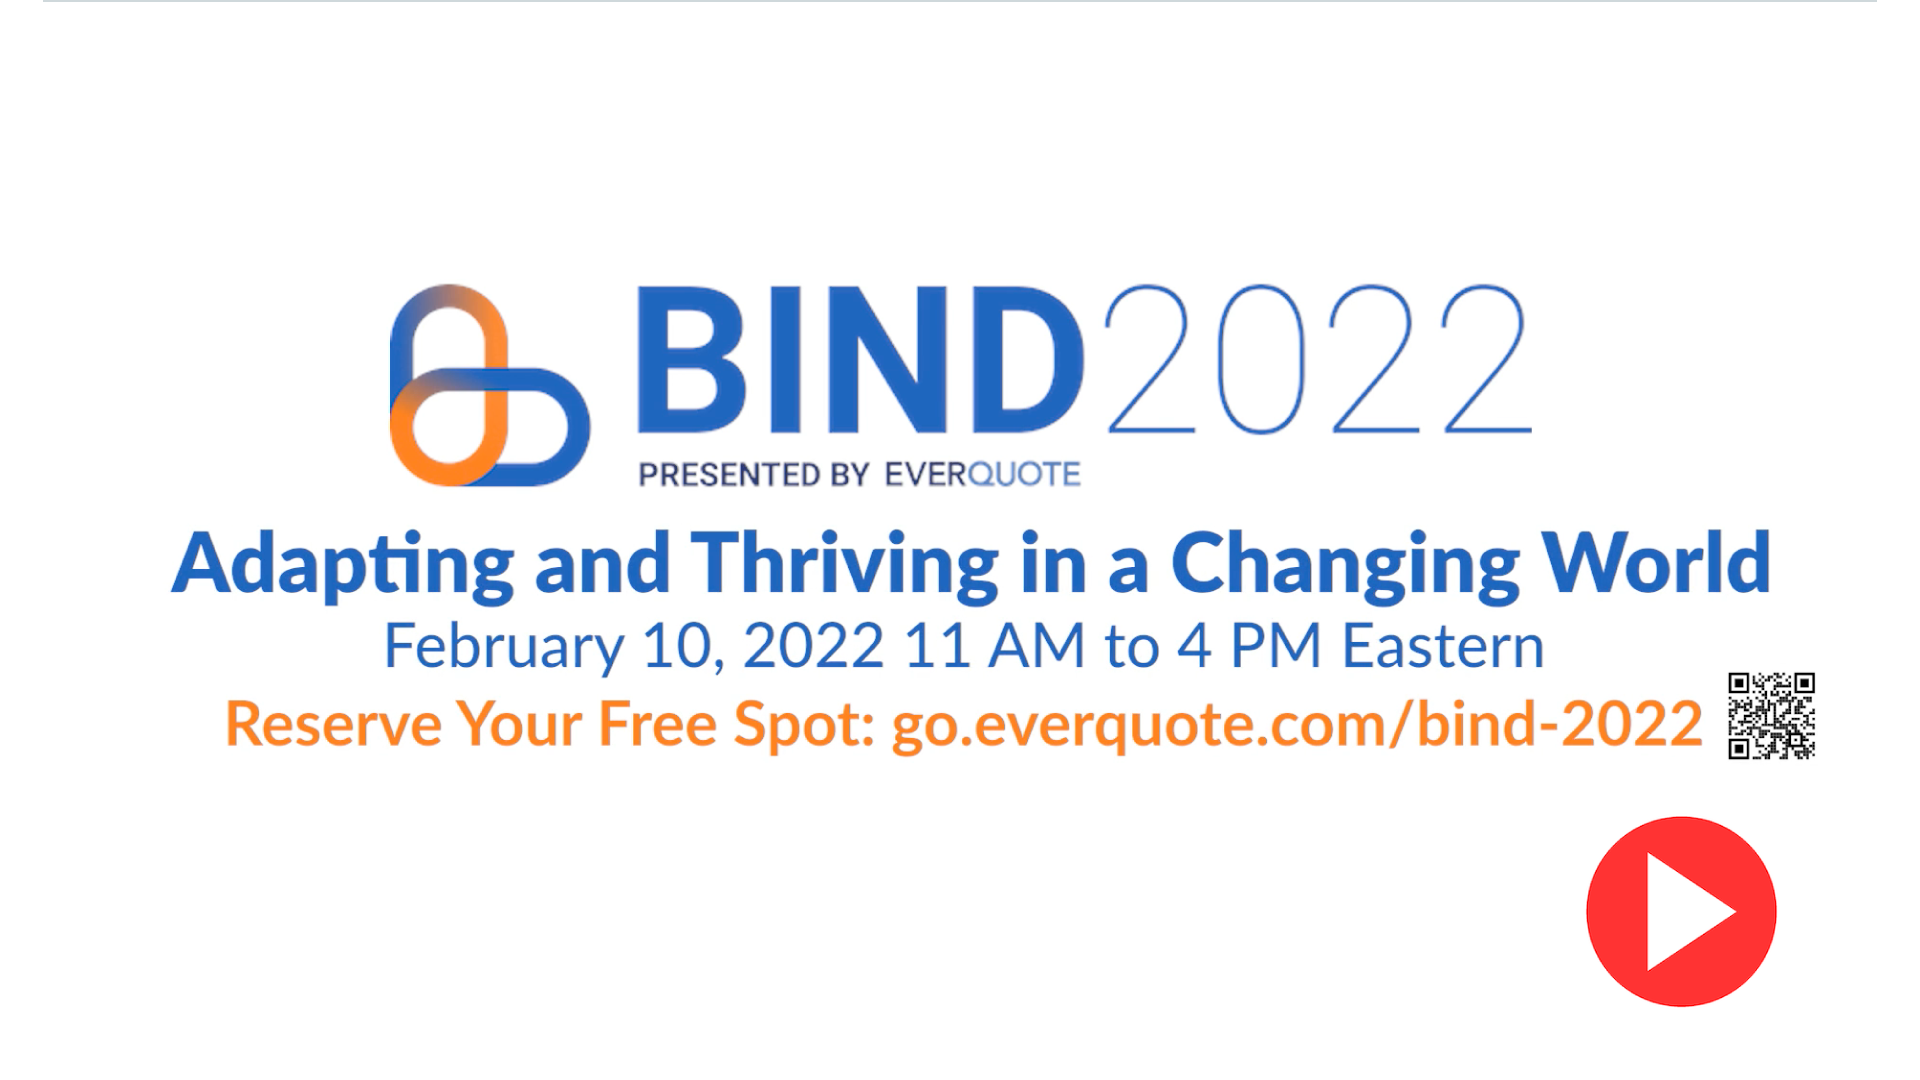 Join EverQuote for BIND2022 – the Free Virtual Conference for Insurance Agents